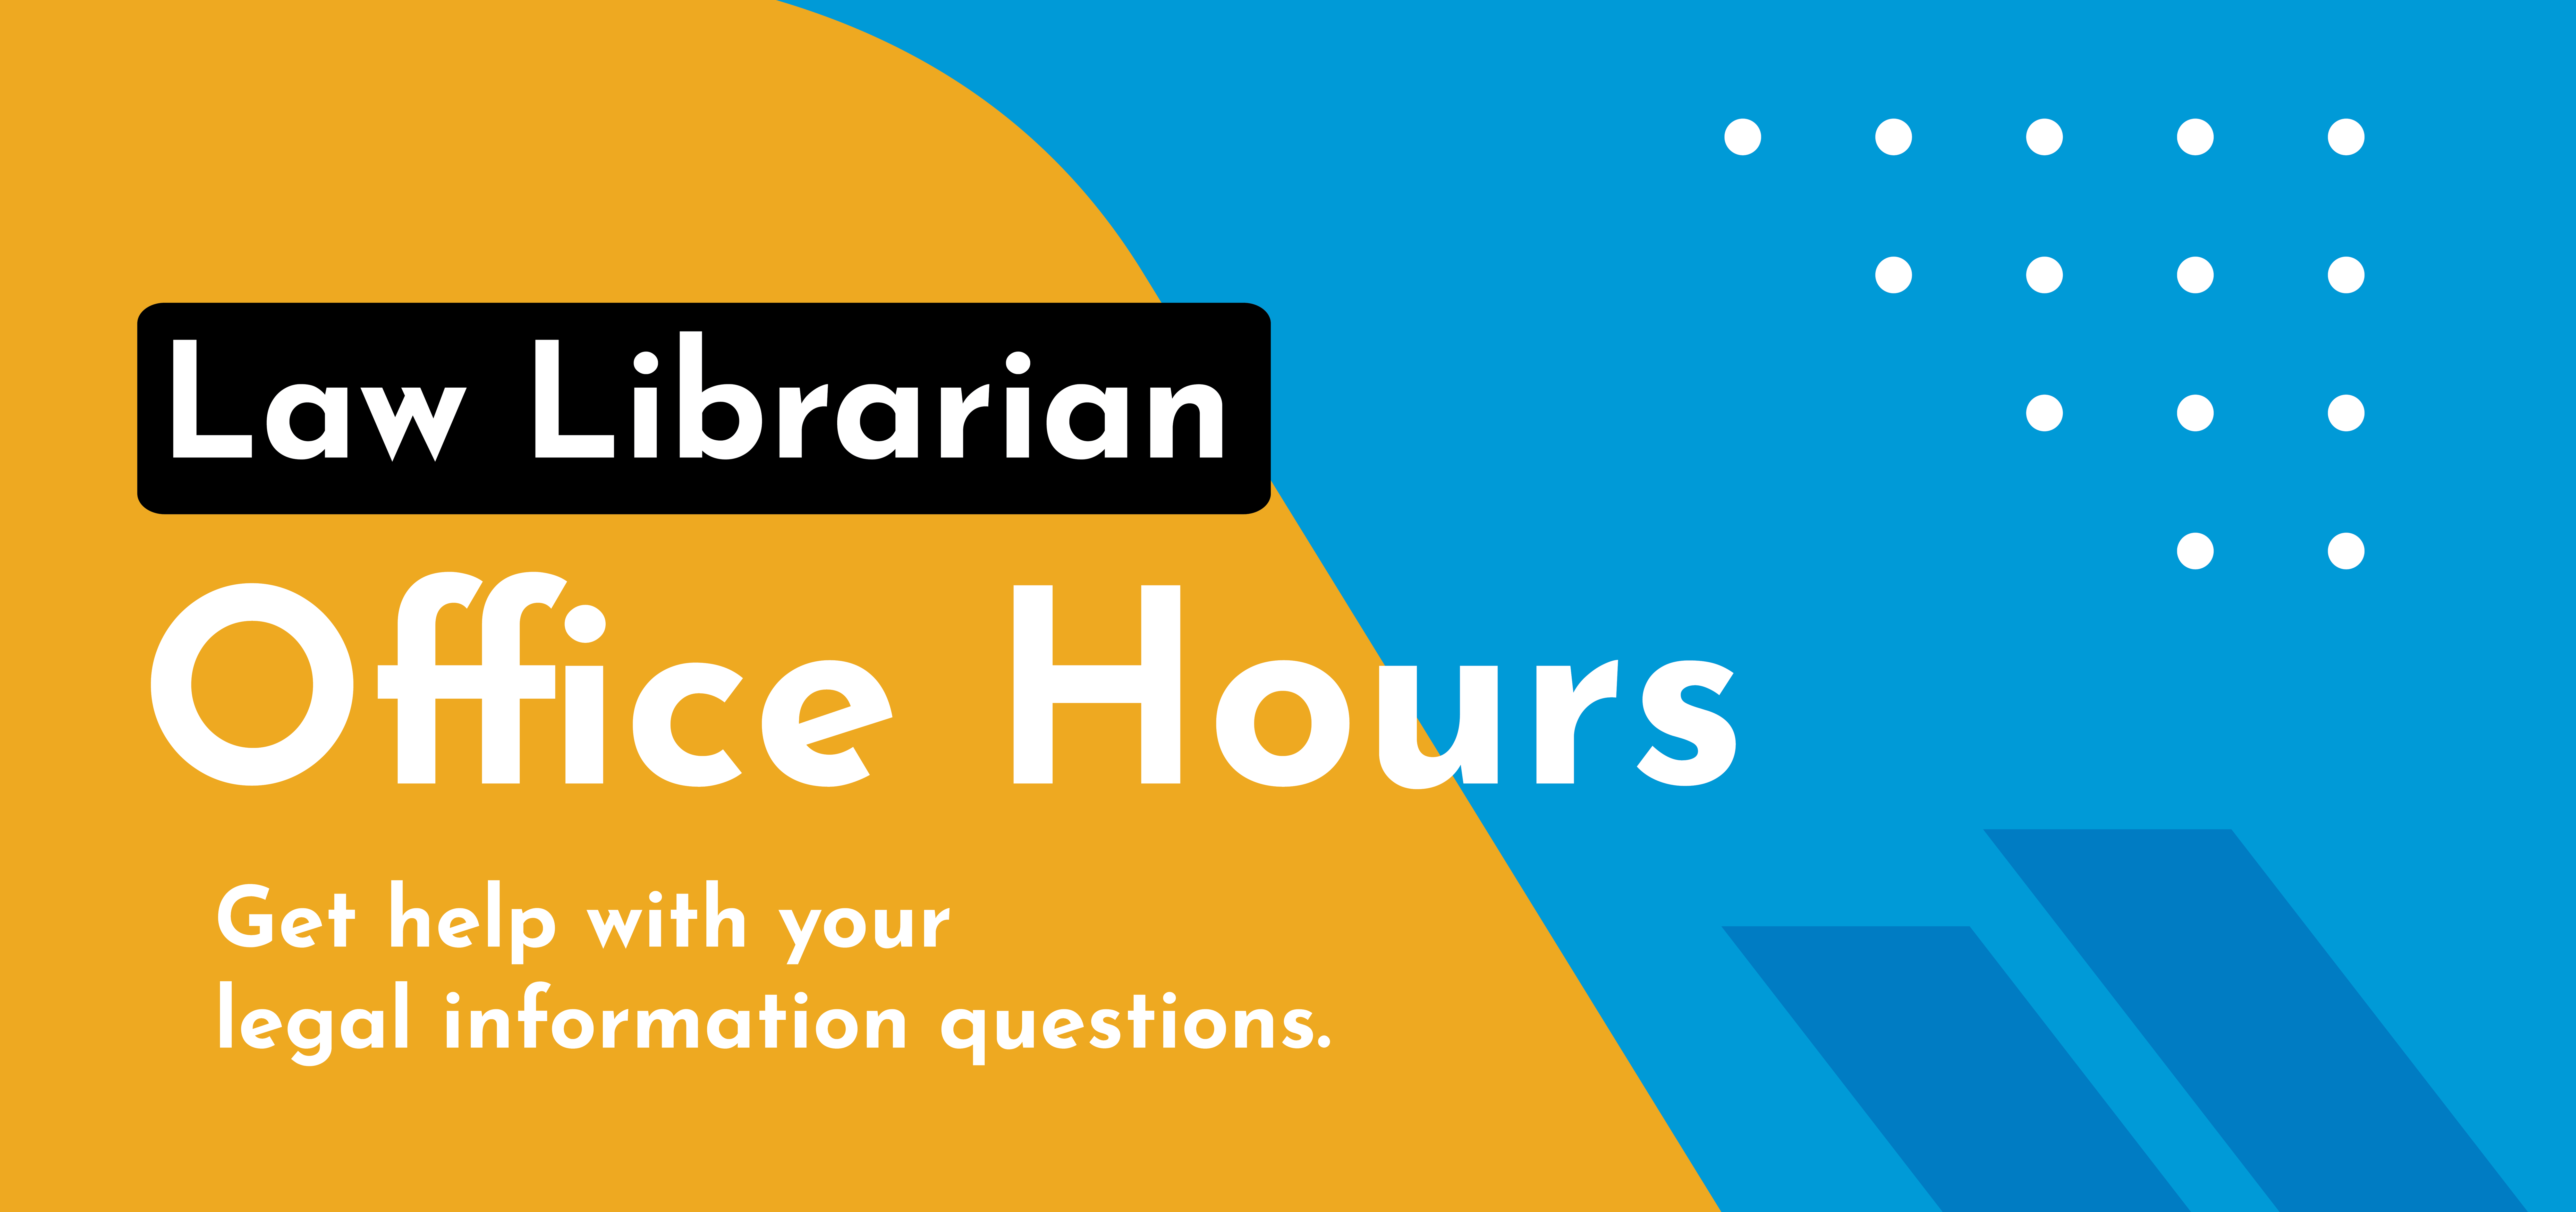 Law Librarian Office Hours title with decorative elements